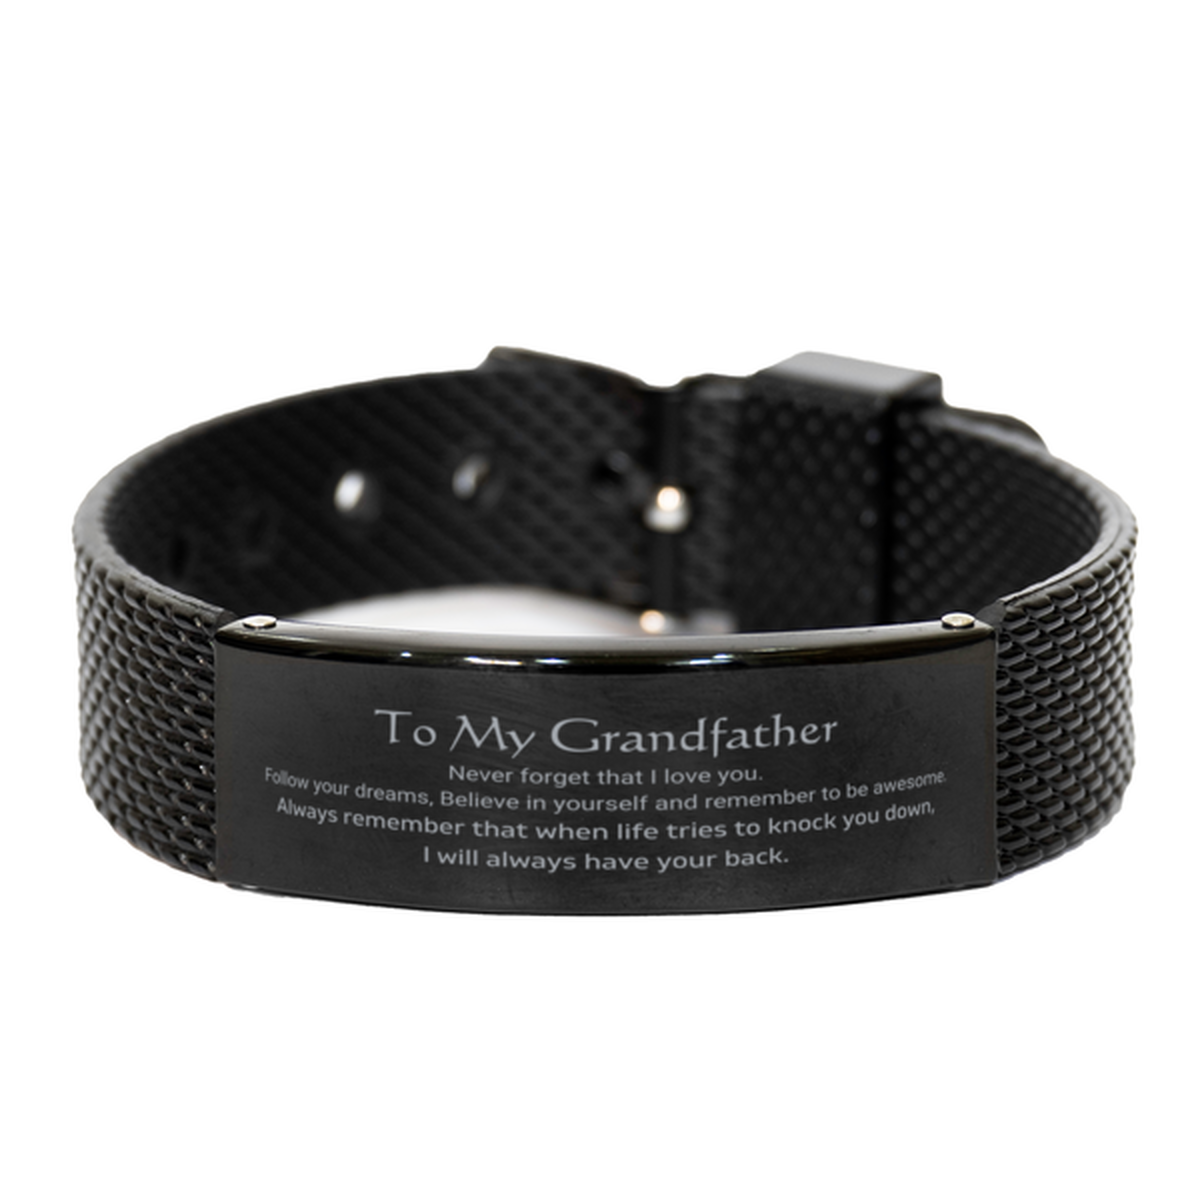 Inspirational Gifts for Grandfather, Follow your dreams, Believe in yourself, Grandfather Black Shark Mesh Bracelet, Birthday Christmas Unique Gifts For Grandfather